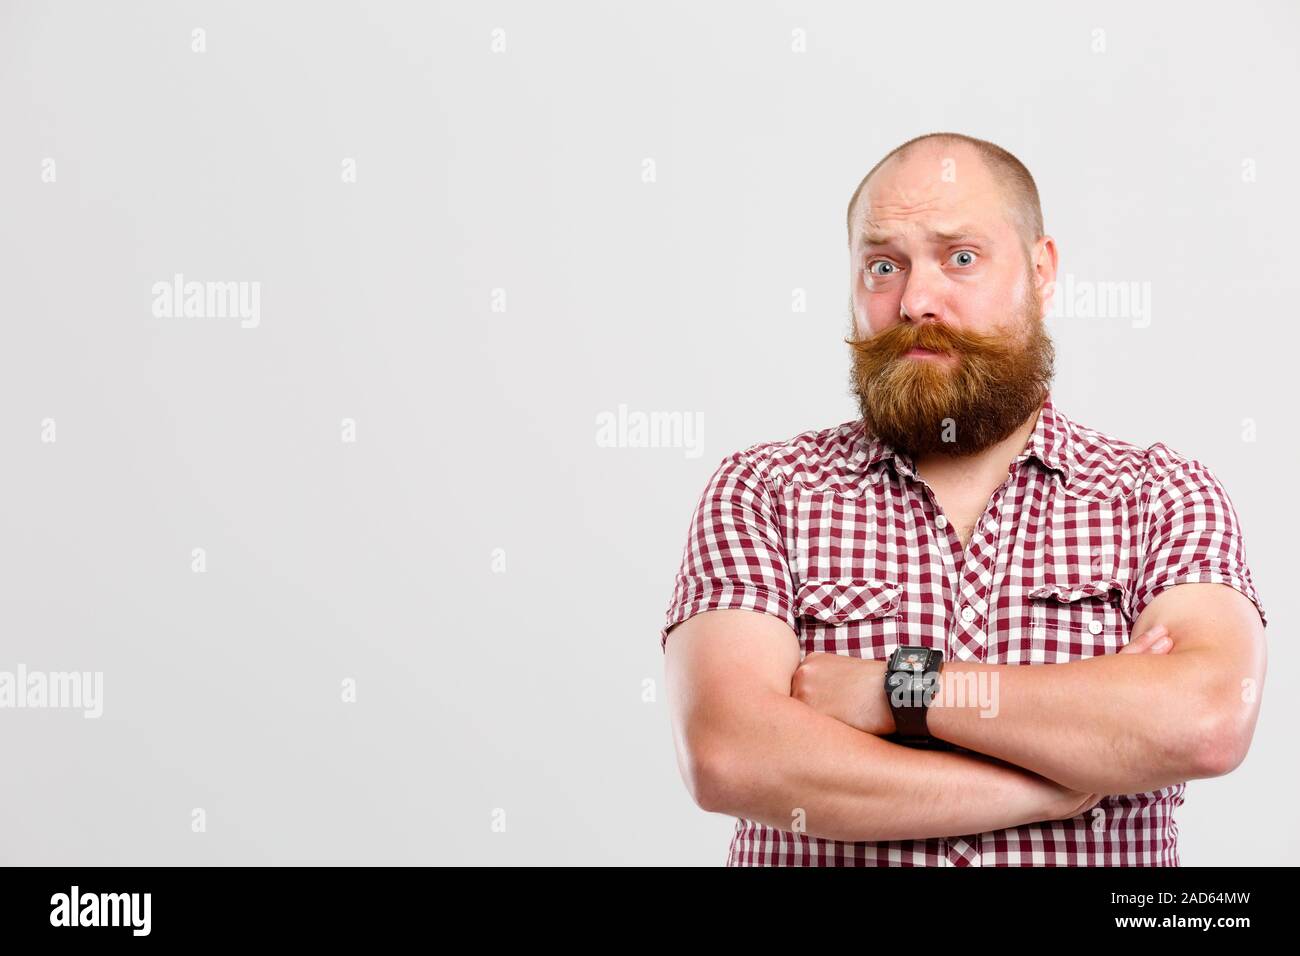 Bewildered man with ginger beard Stock Photo